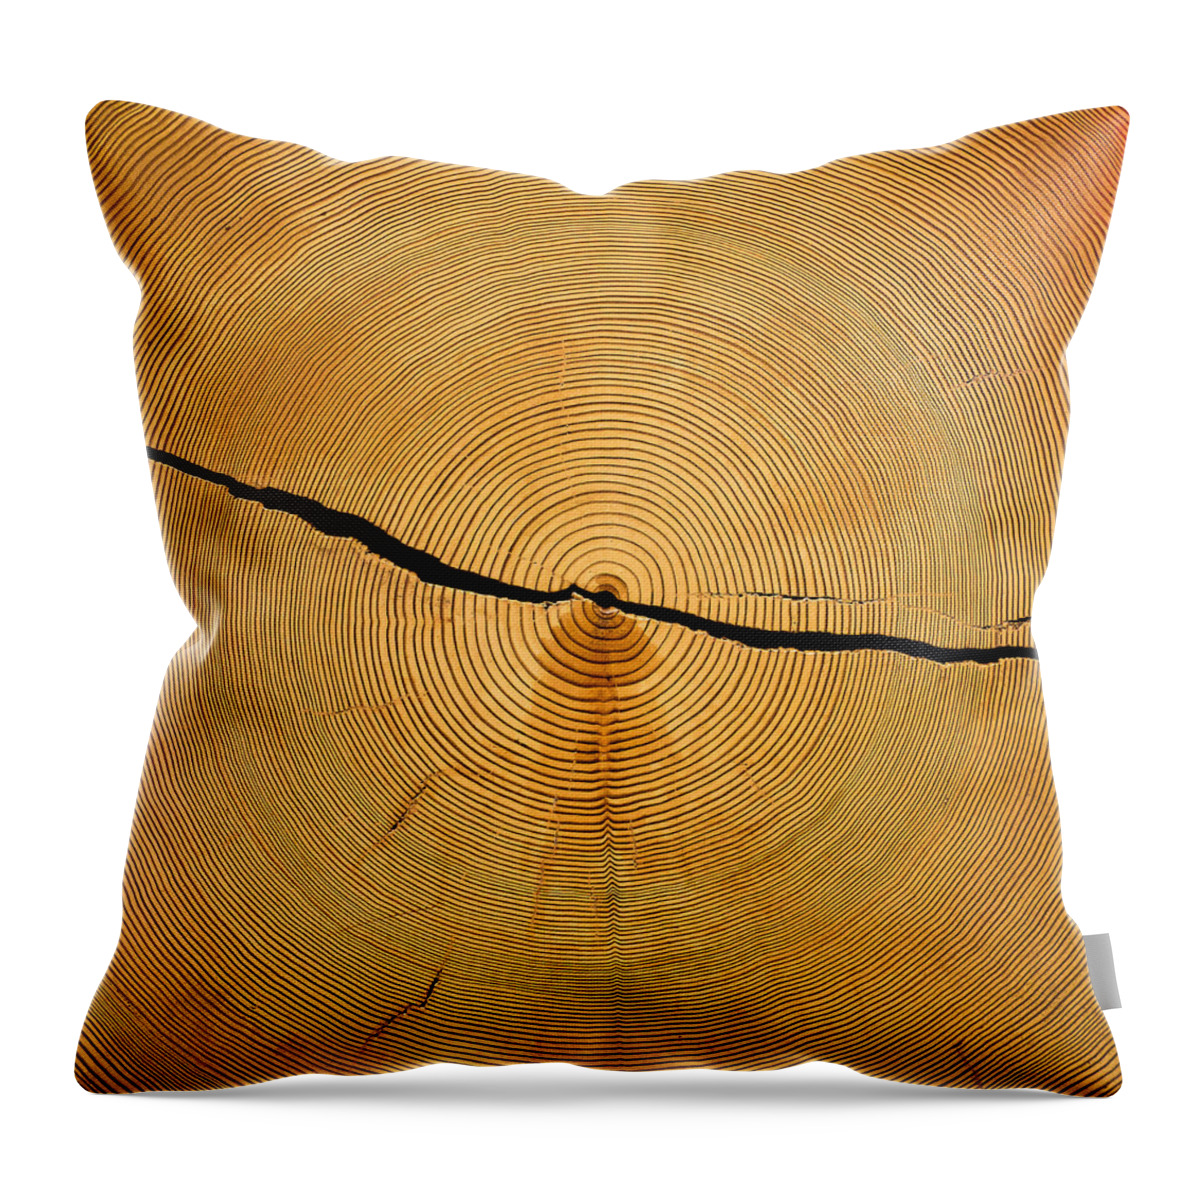 Tree Rings Throw Pillow featuring the photograph Tree Rings by Steven Ralser